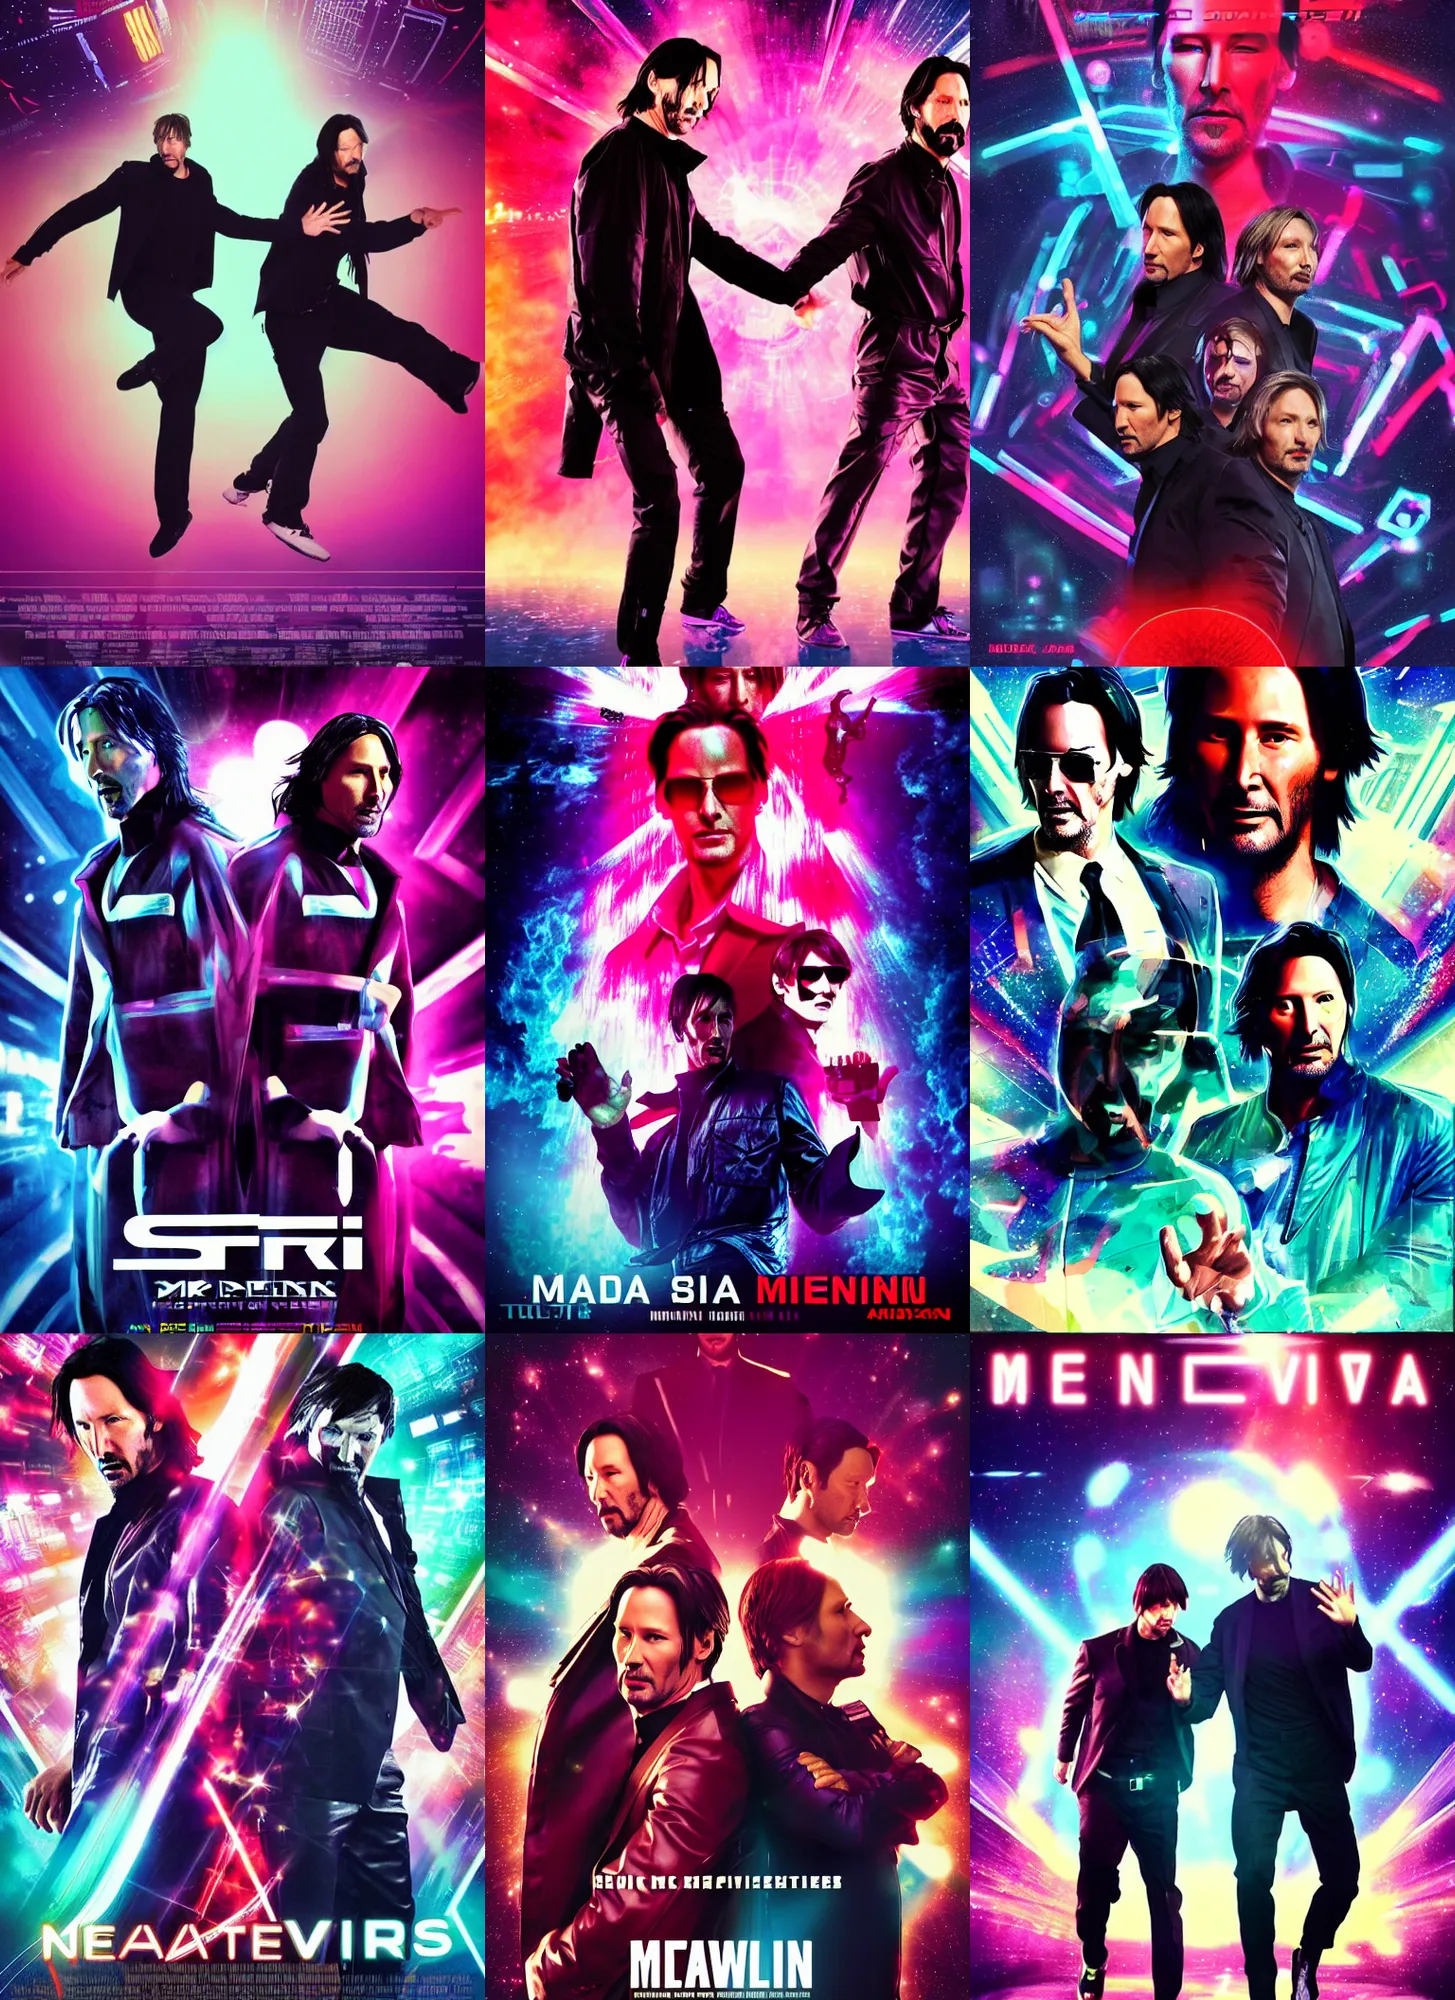 Prompt: sci-fi movie poster with Keanu Reeves and Mads Mikkelsen in an epic dance battle, vaporwave style